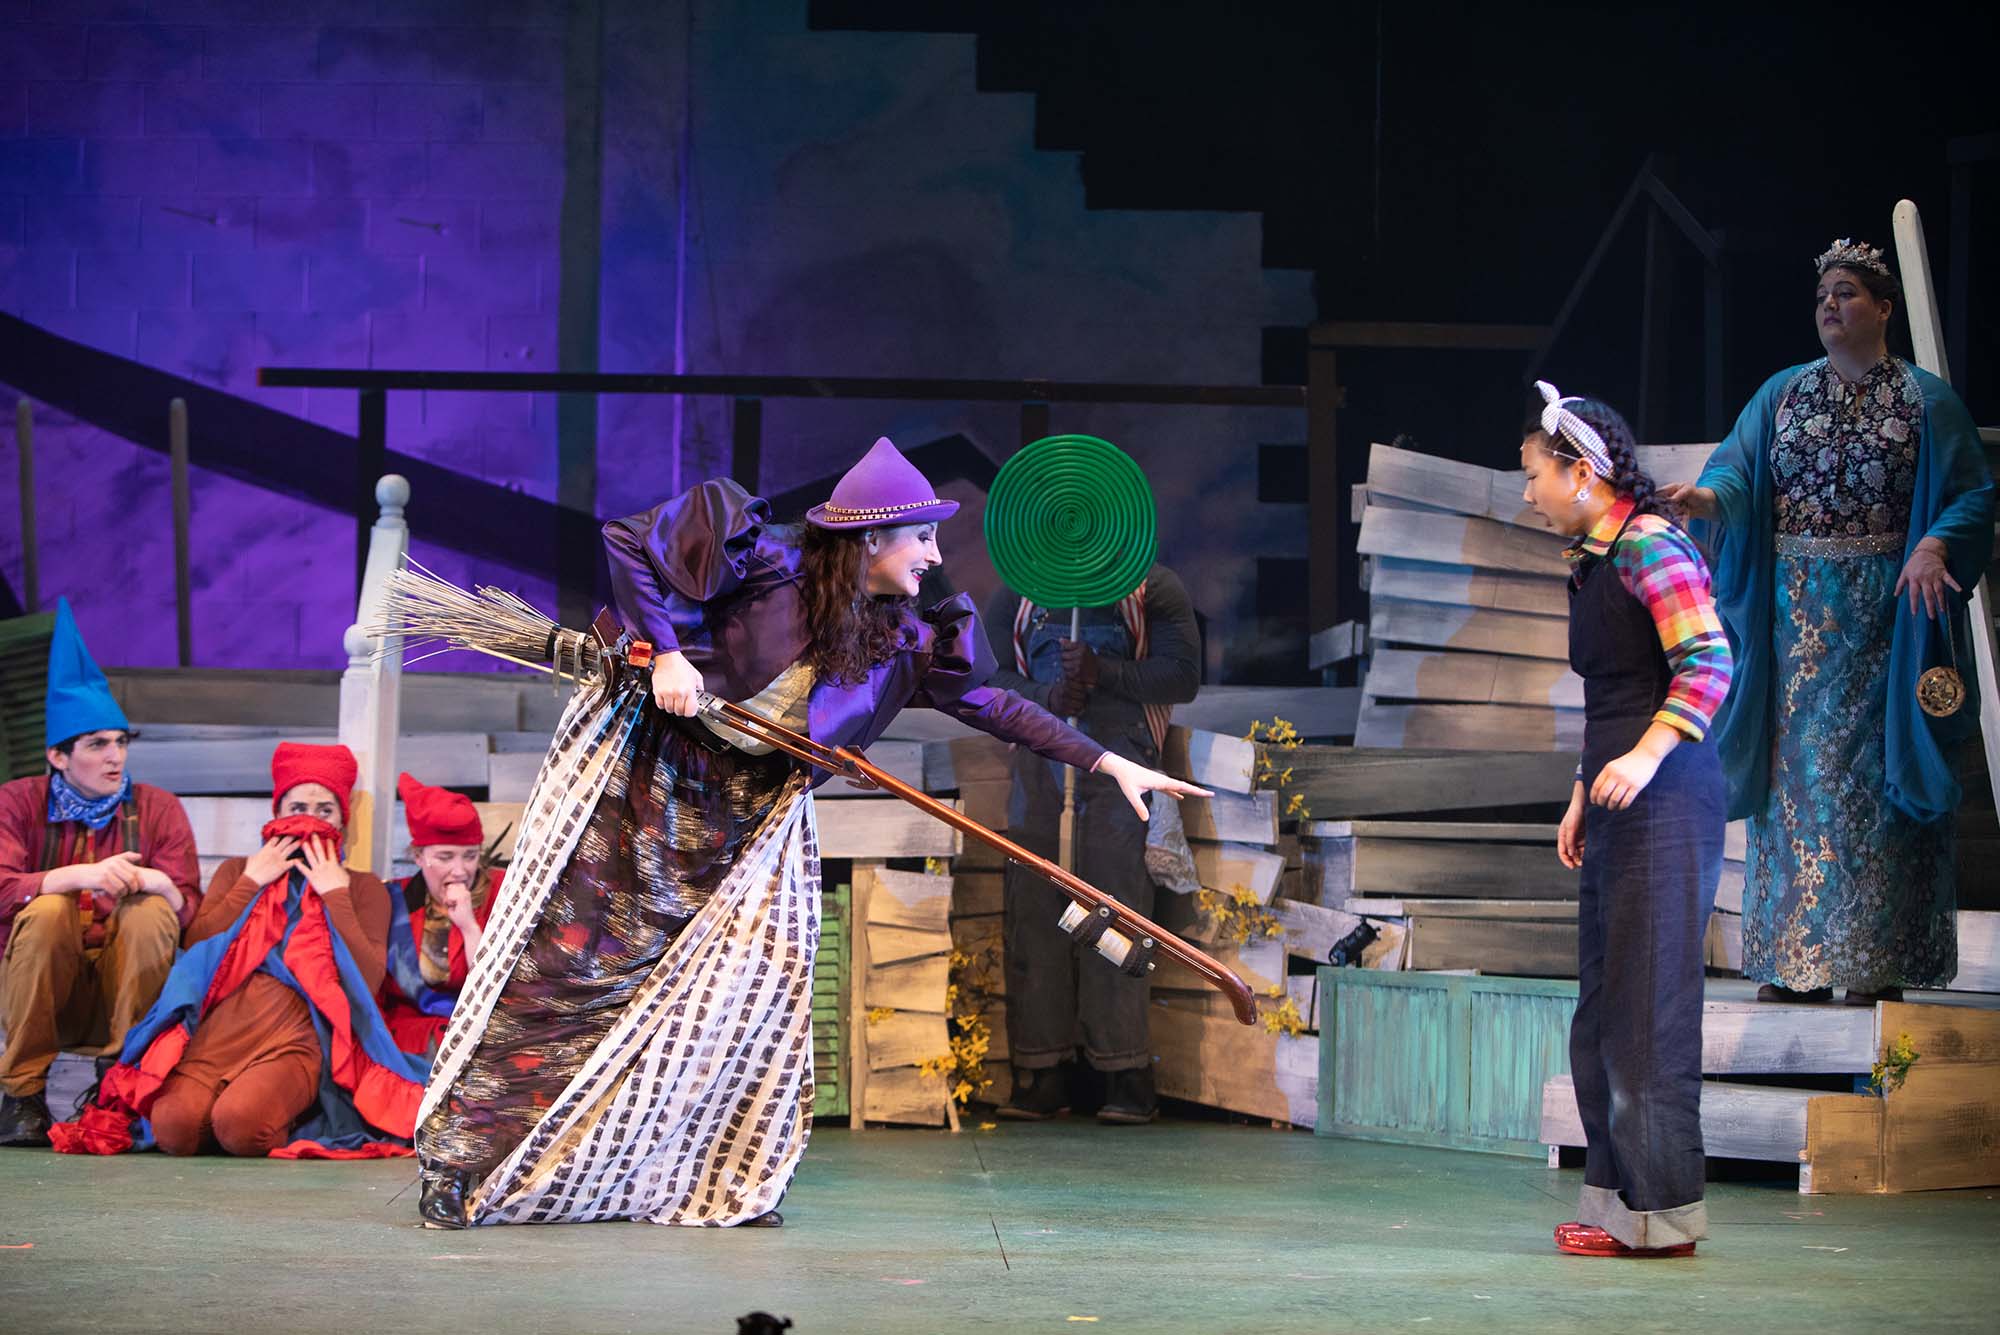 Photo of Katie Anne Clark (left) as the Wicked Witch of the West with Lily Park as Dorothy in Boston University’s production of “The Wizard of Oz,” during a dress rehearsal on Wednesday, April 6, 2022. Clark wears a purple witch's hat and long patterned dress. Park wears a handkerchief around her head and overalls. Behind them are stacked metal beams and other debris.